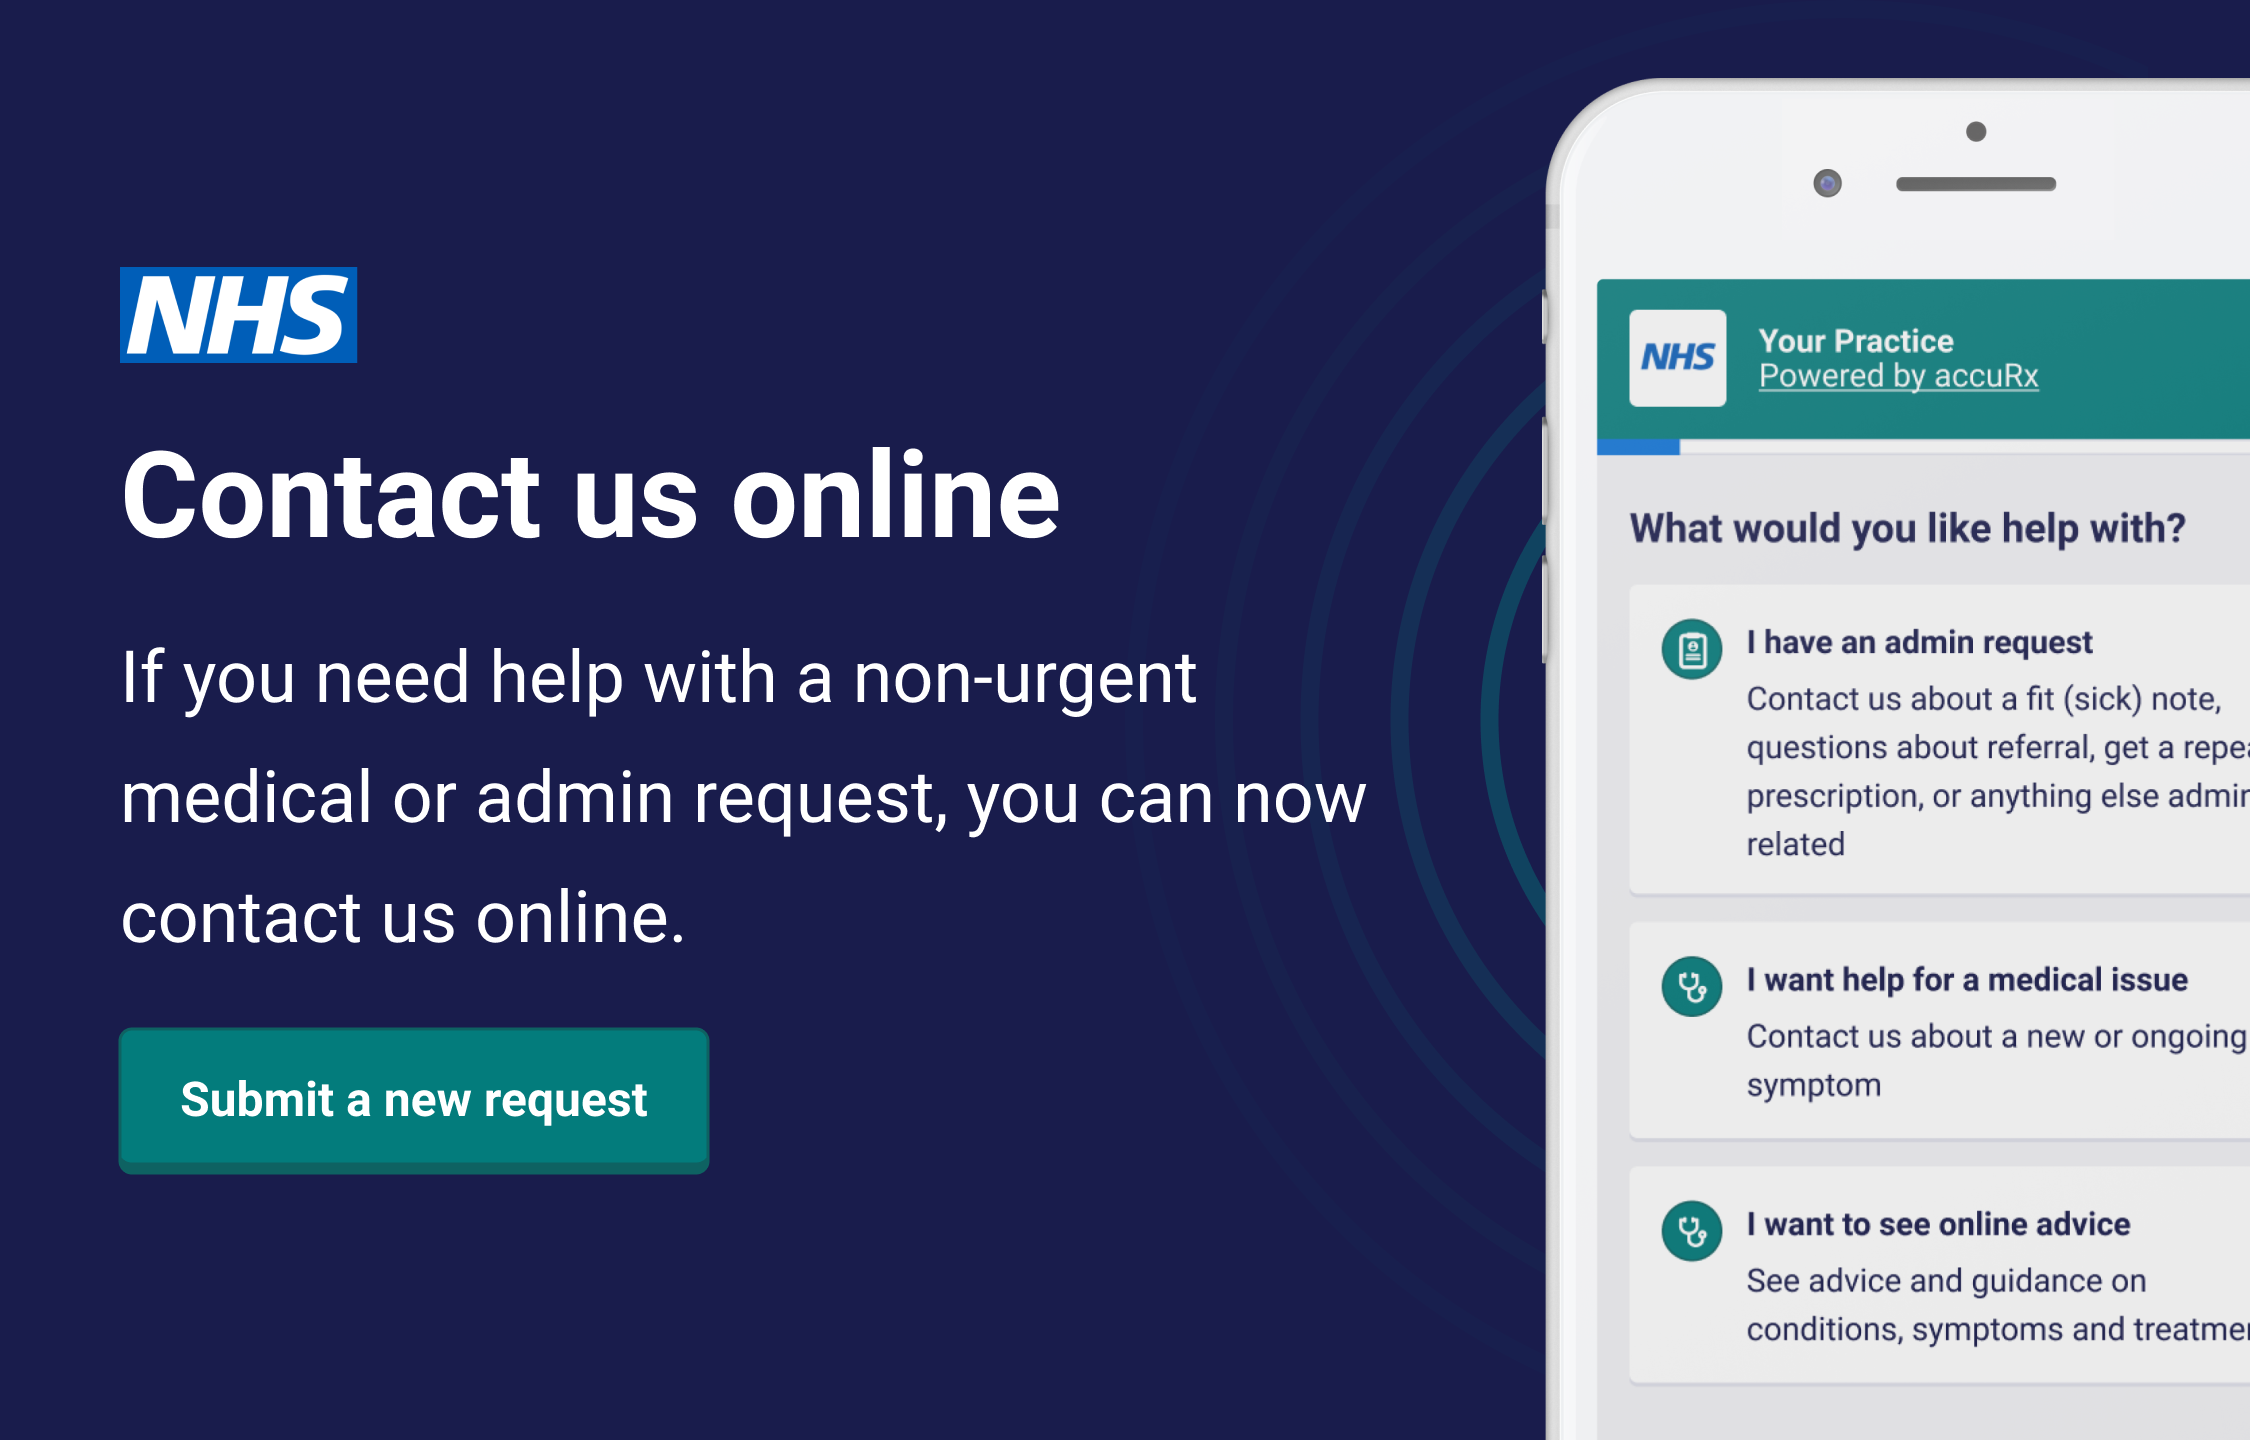 Contact us online. If you need help with a non-urgent medical or admin request you can now contact us online.